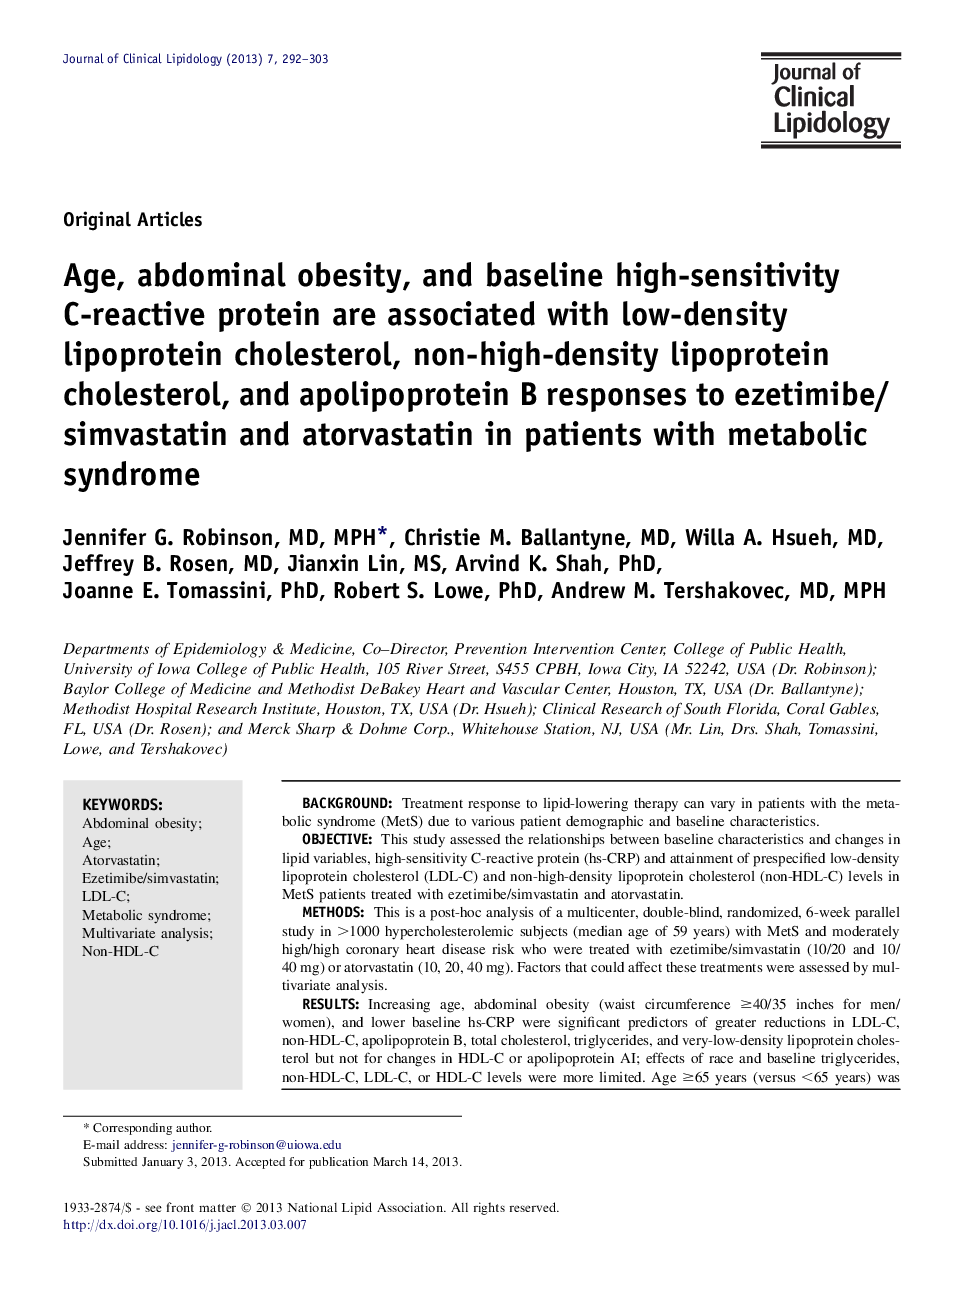 Age, abdominal obesity, and baseline high-sensitivity C-reactive protein are associated with low-density lipoprotein cholesterol, non-high-density lipoprotein cholesterol, and apolipoprotein B responses to ezetimibe/simvastatin and atorvastatin in patient